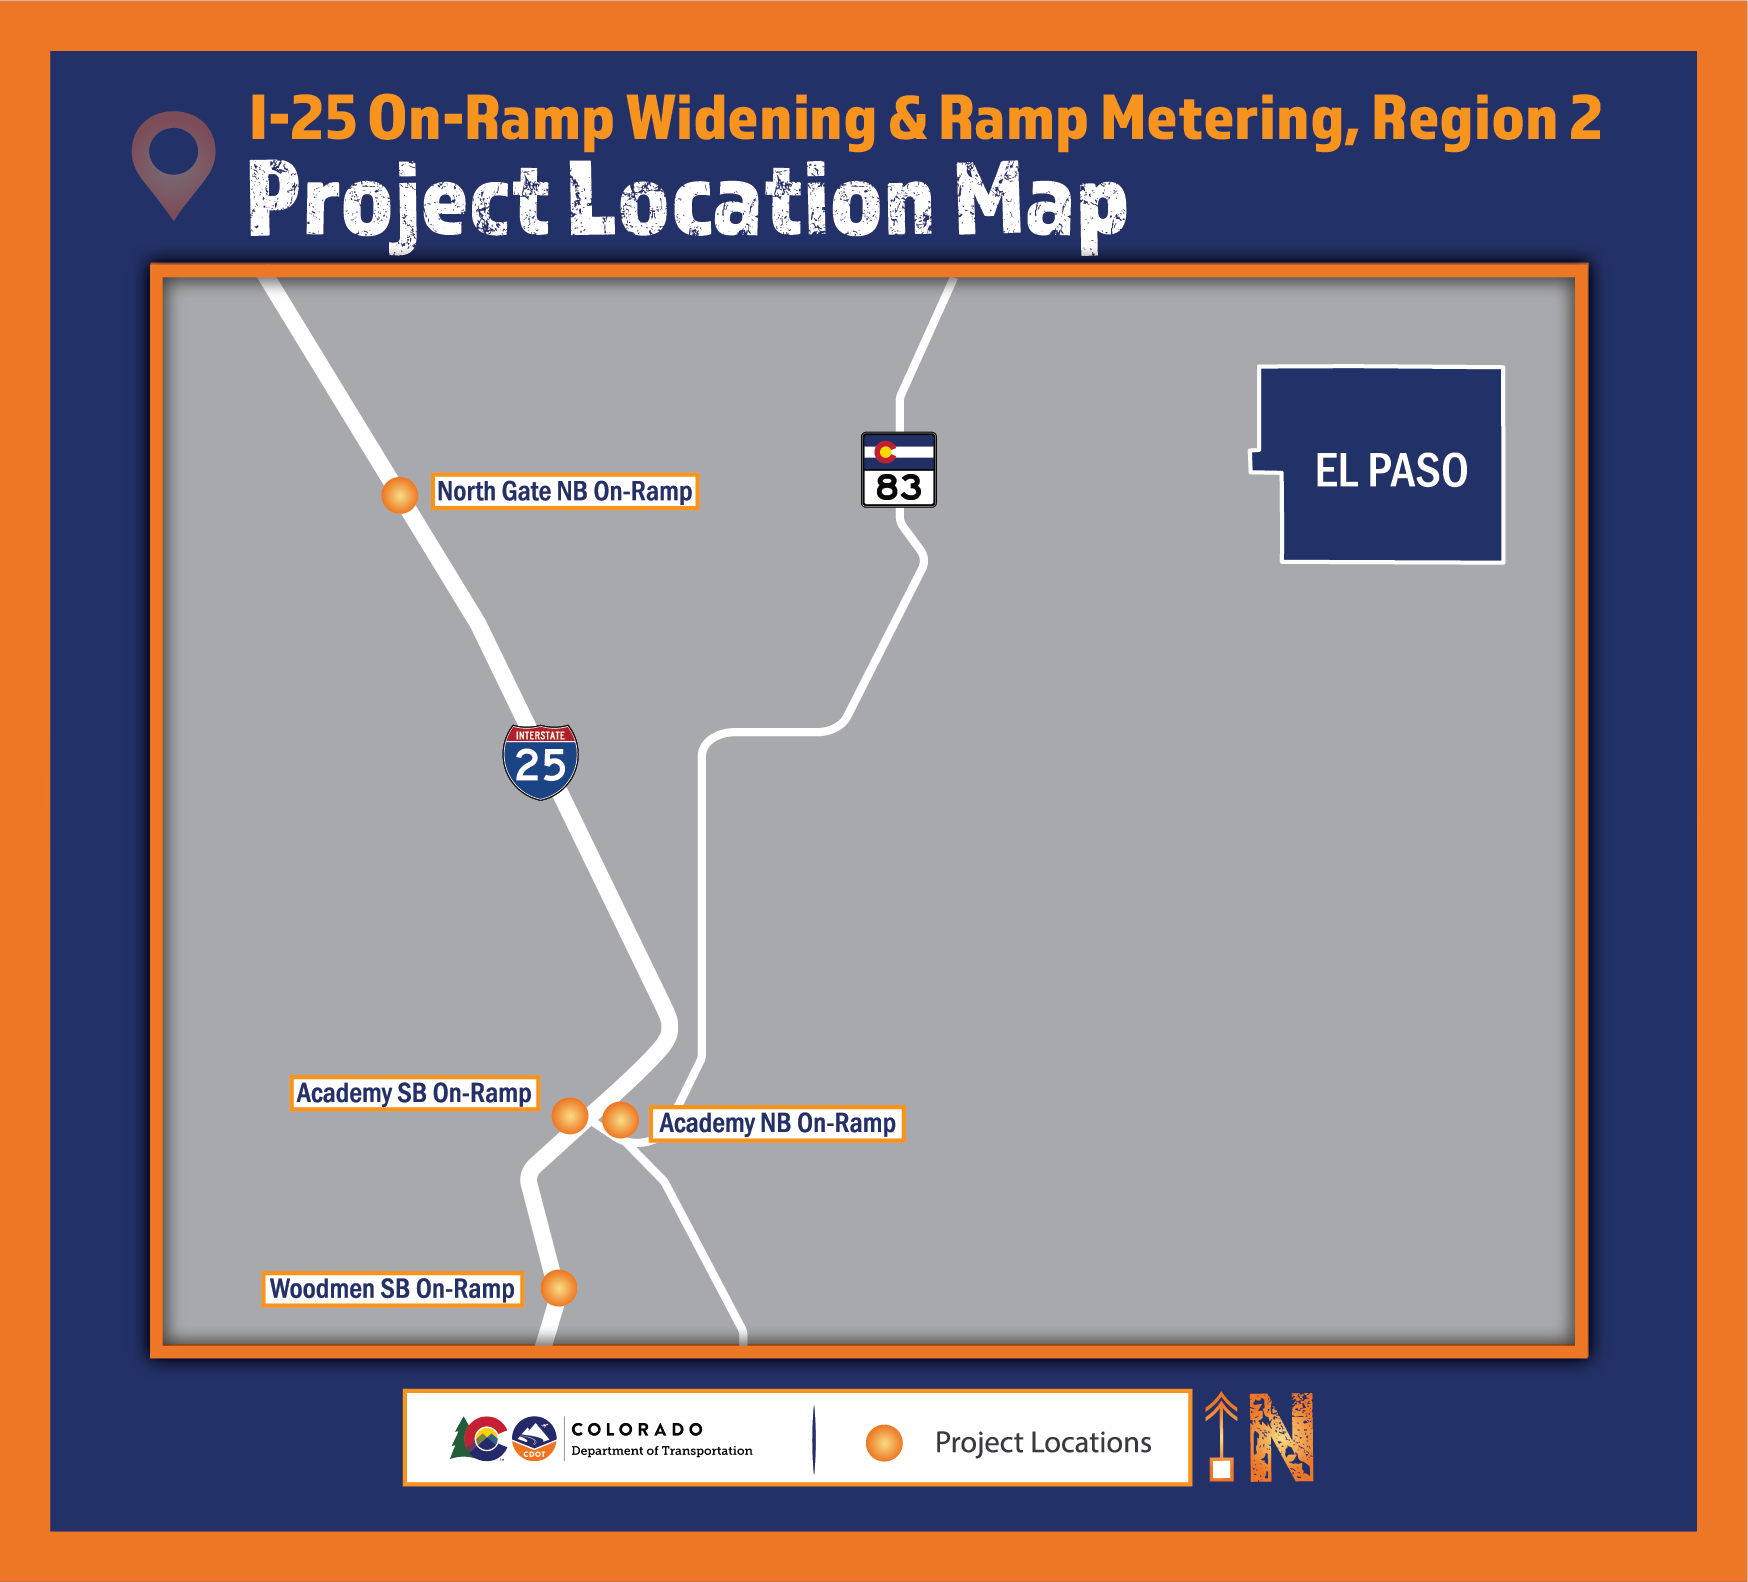 I-25 On-Ramp Widening and Ramp Metering R2 Project Location Map v1 1.7.2021-01.png detail image